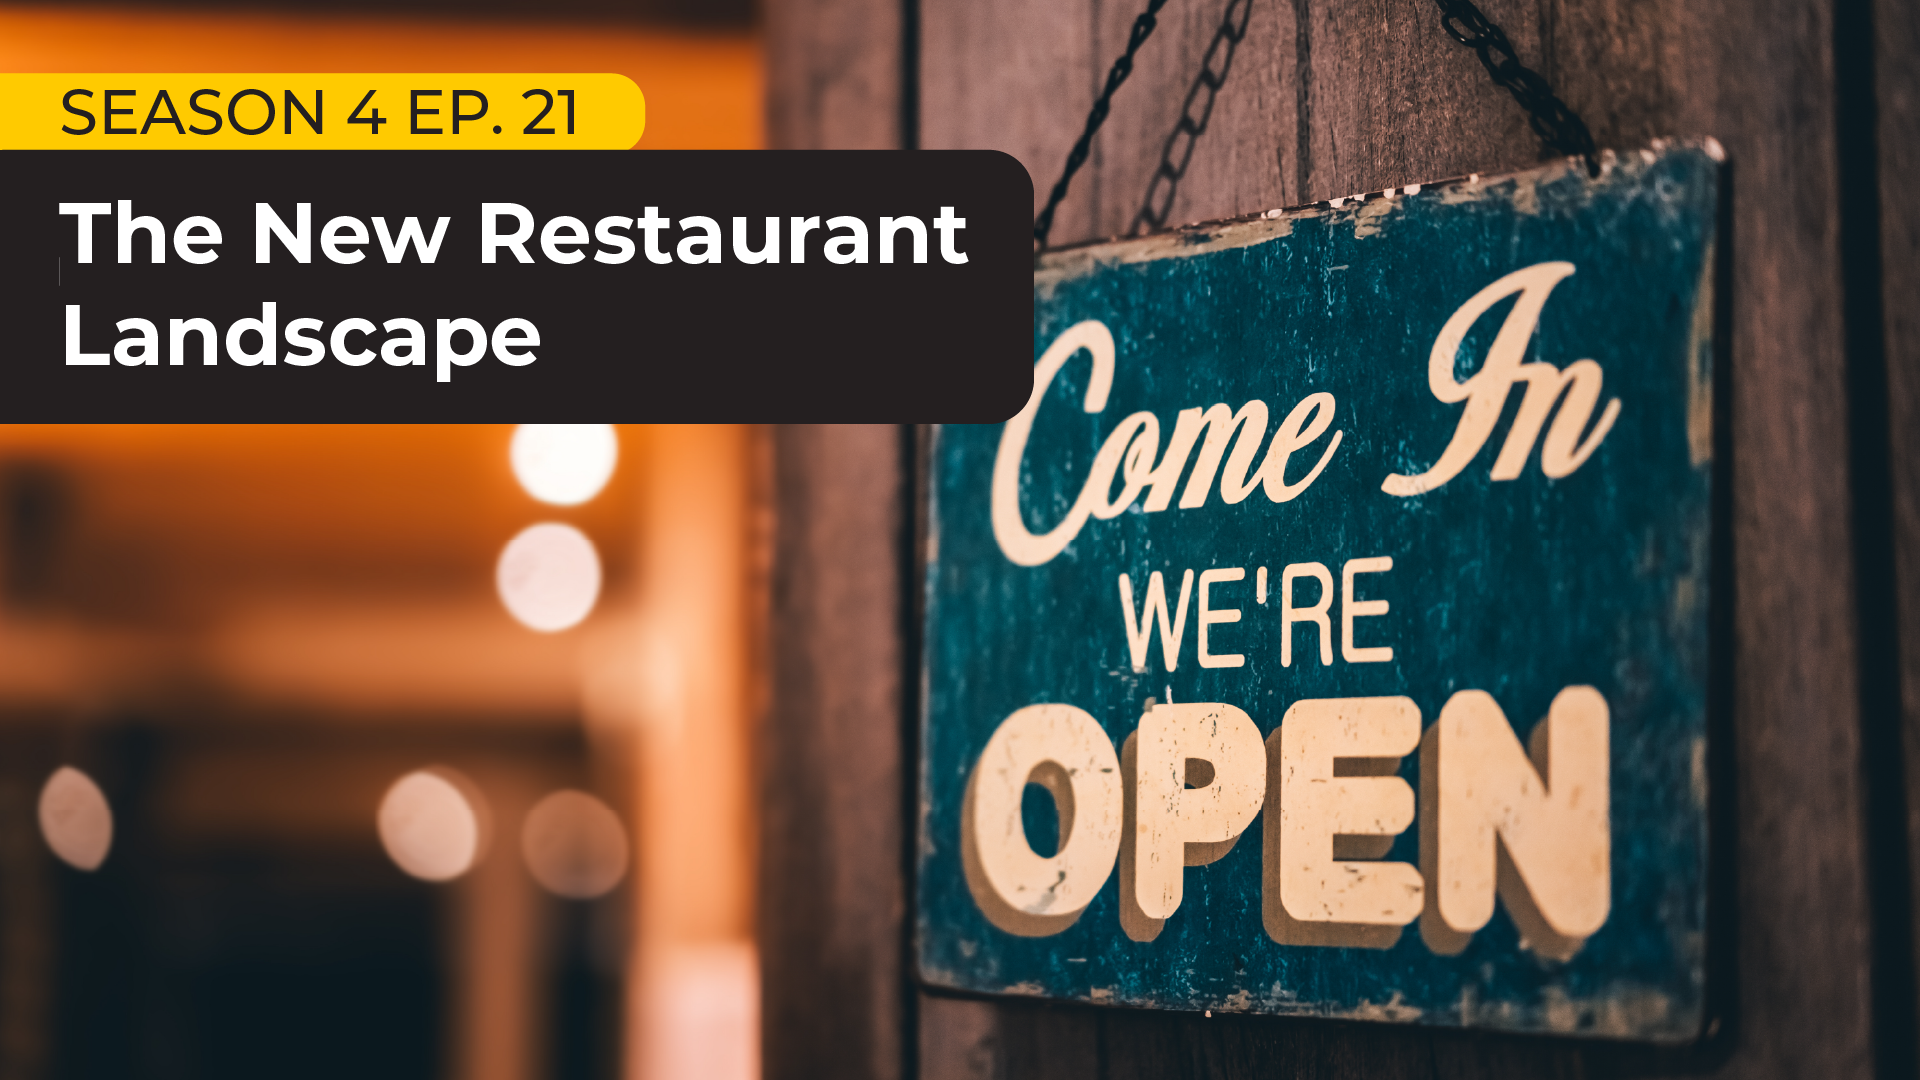 Datassential team Jack Li, Beth Cushing, and Amanda Torgerson dig into how the restaurant landscape has evolved and where its headed, including the latest industry developments, new flavor trends, and other pertinent information you need to plan for your business.